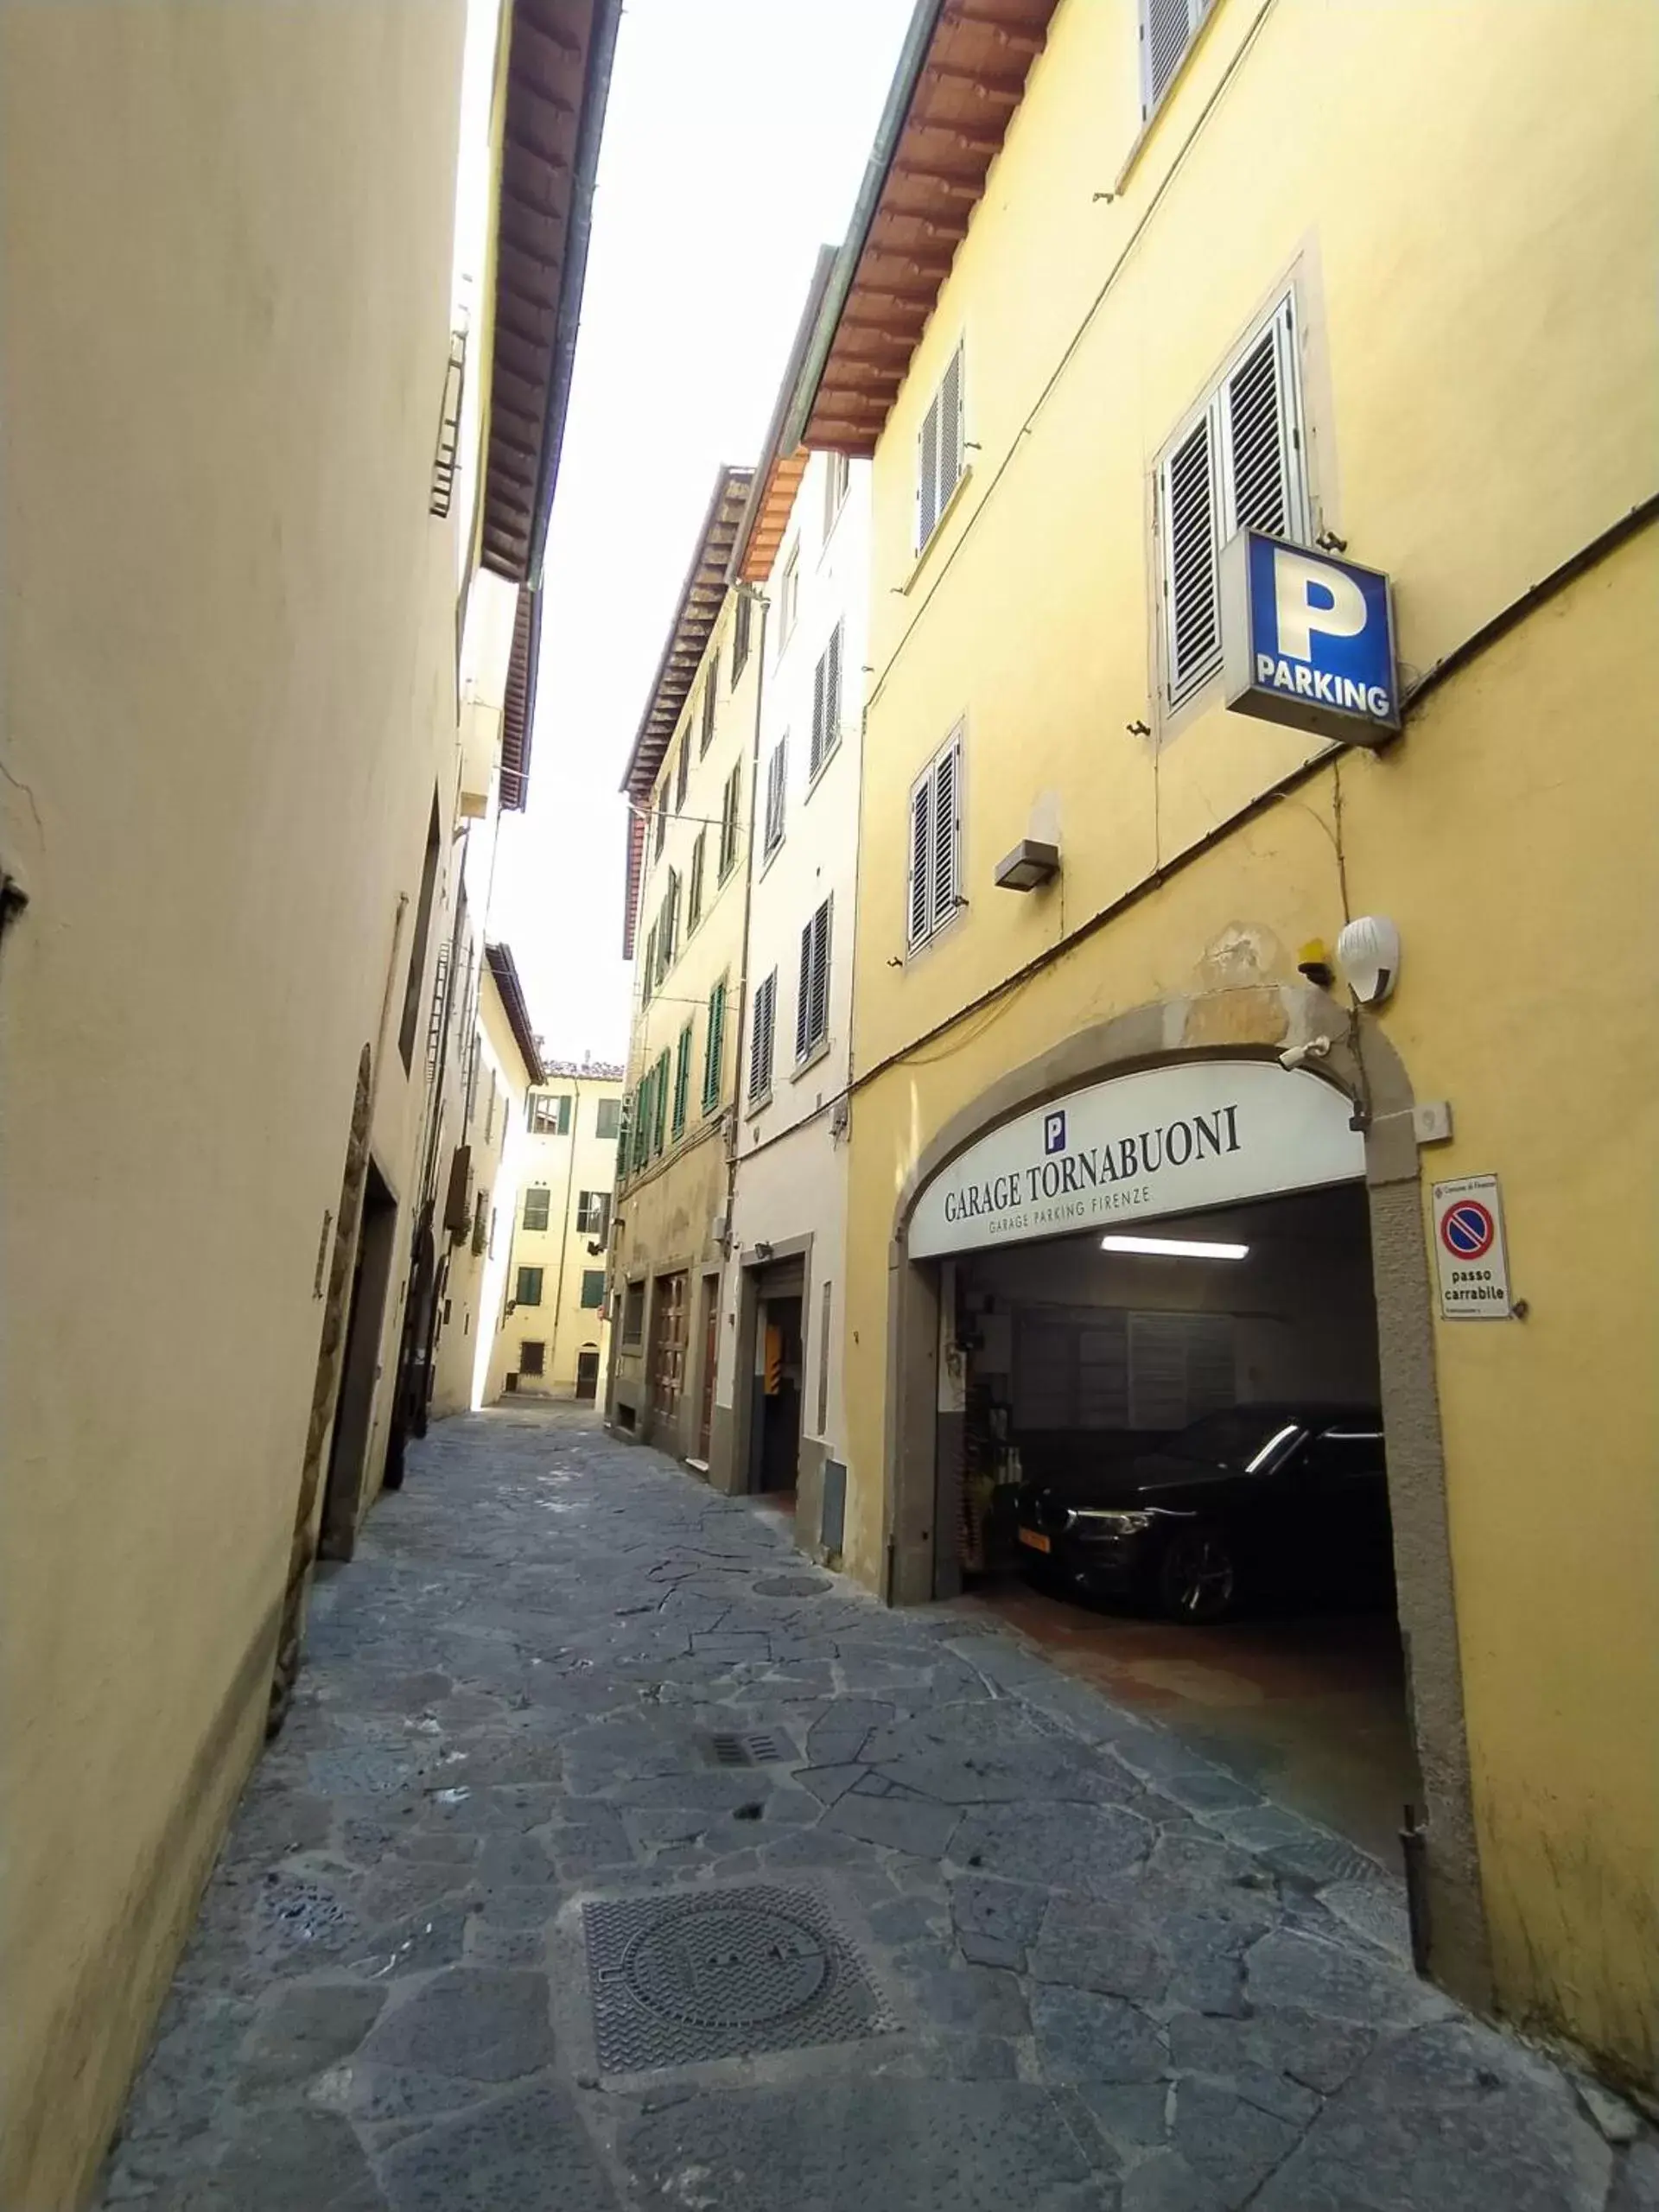 Parking in Tornabuoni View